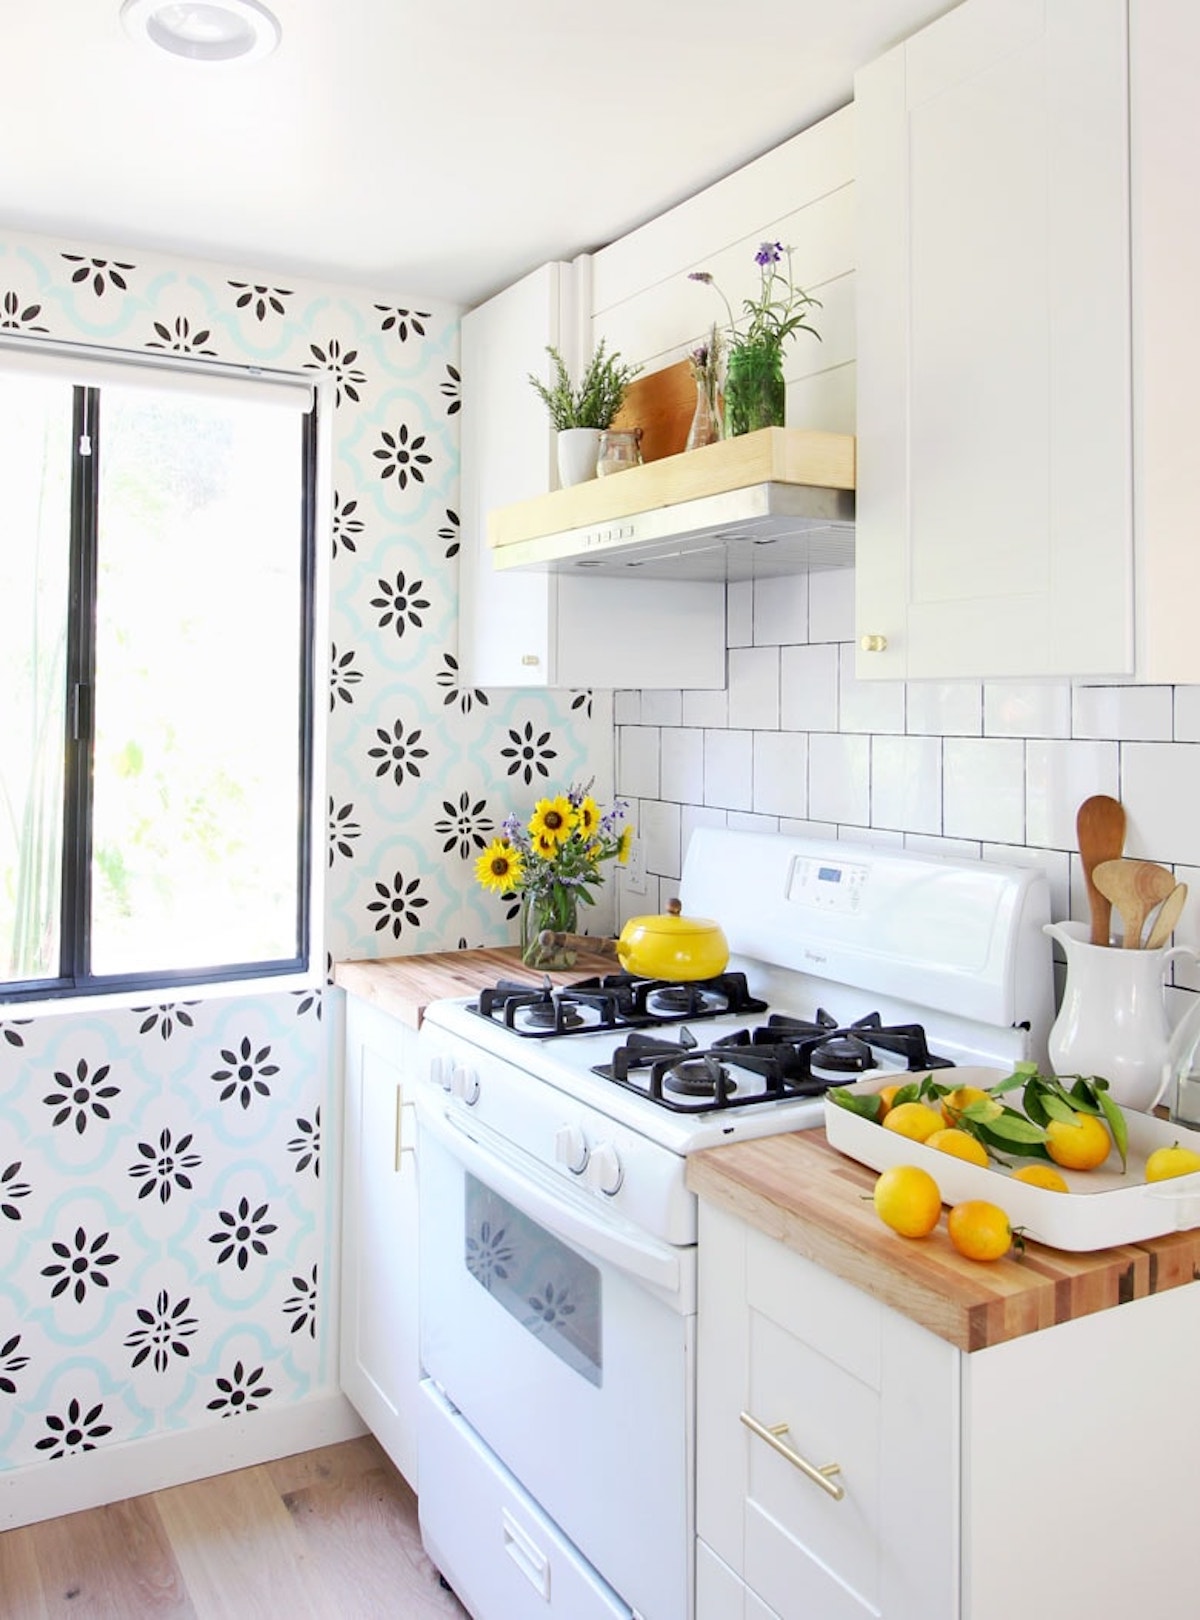 A ductless range hood is below open shelving in a kitchen to display plants, and decor.